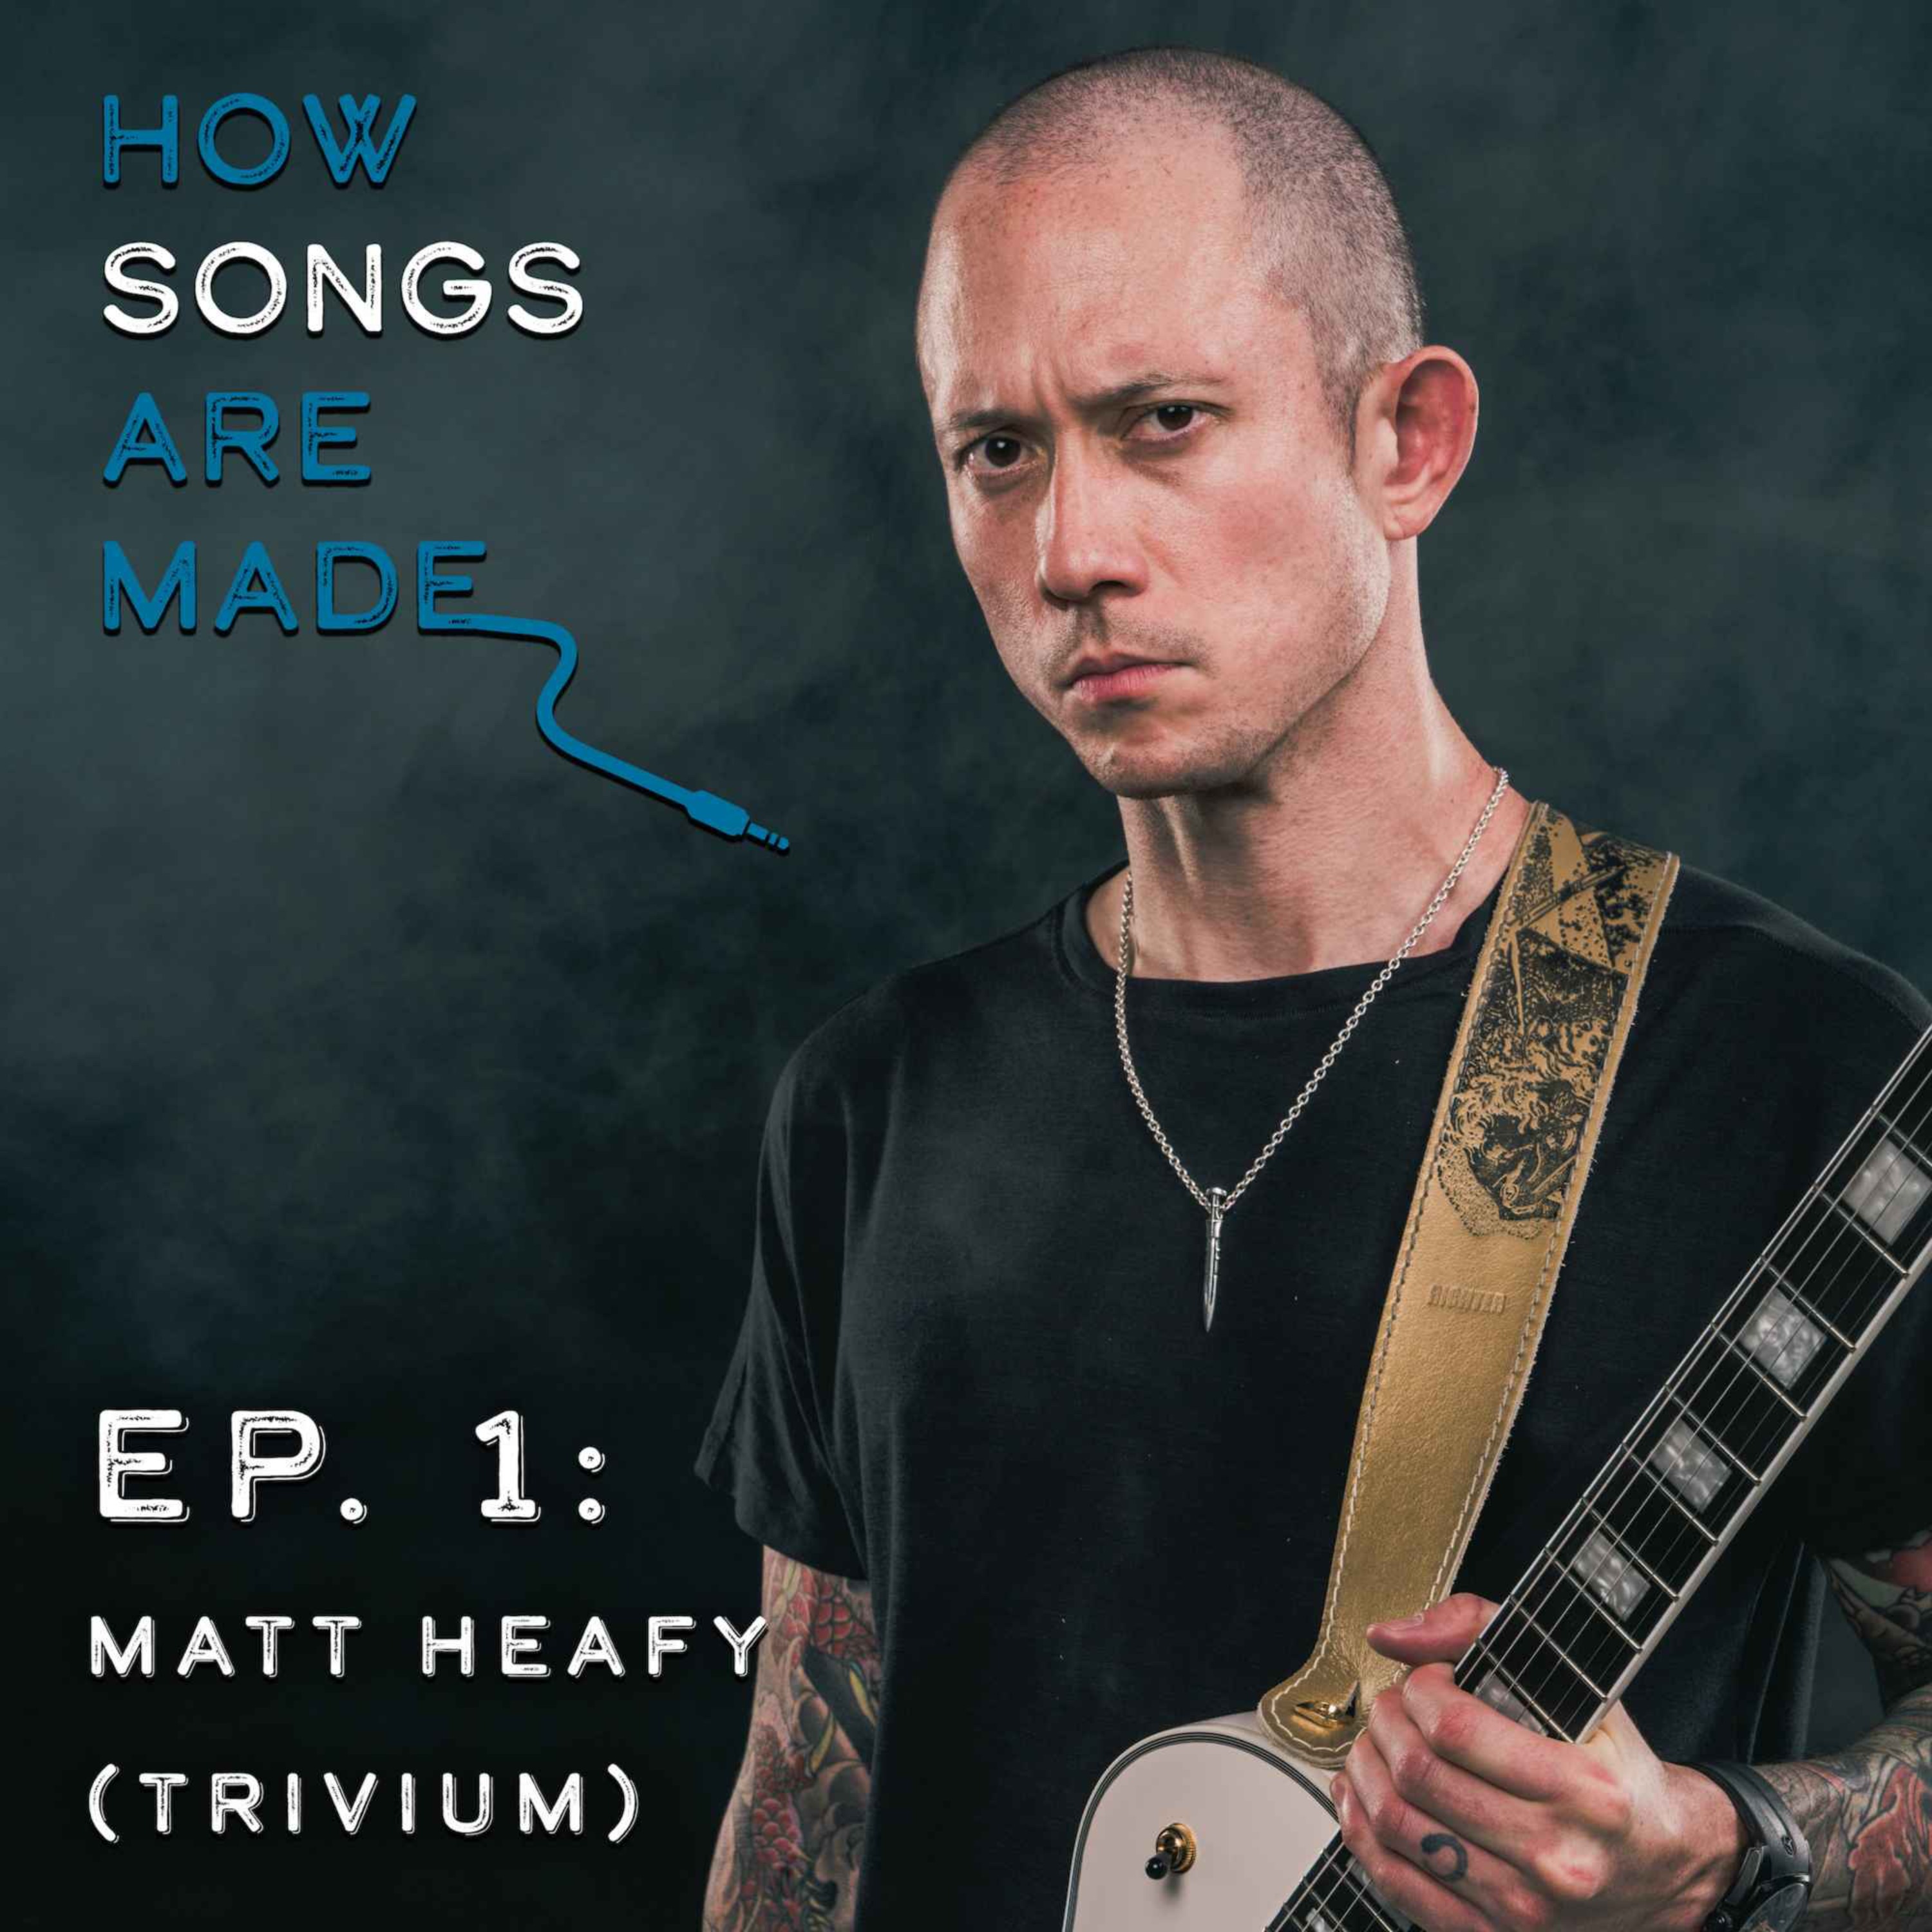 Matt Heafy (Trivium) - How We Wrote “In The Court Of The Dragon” Image